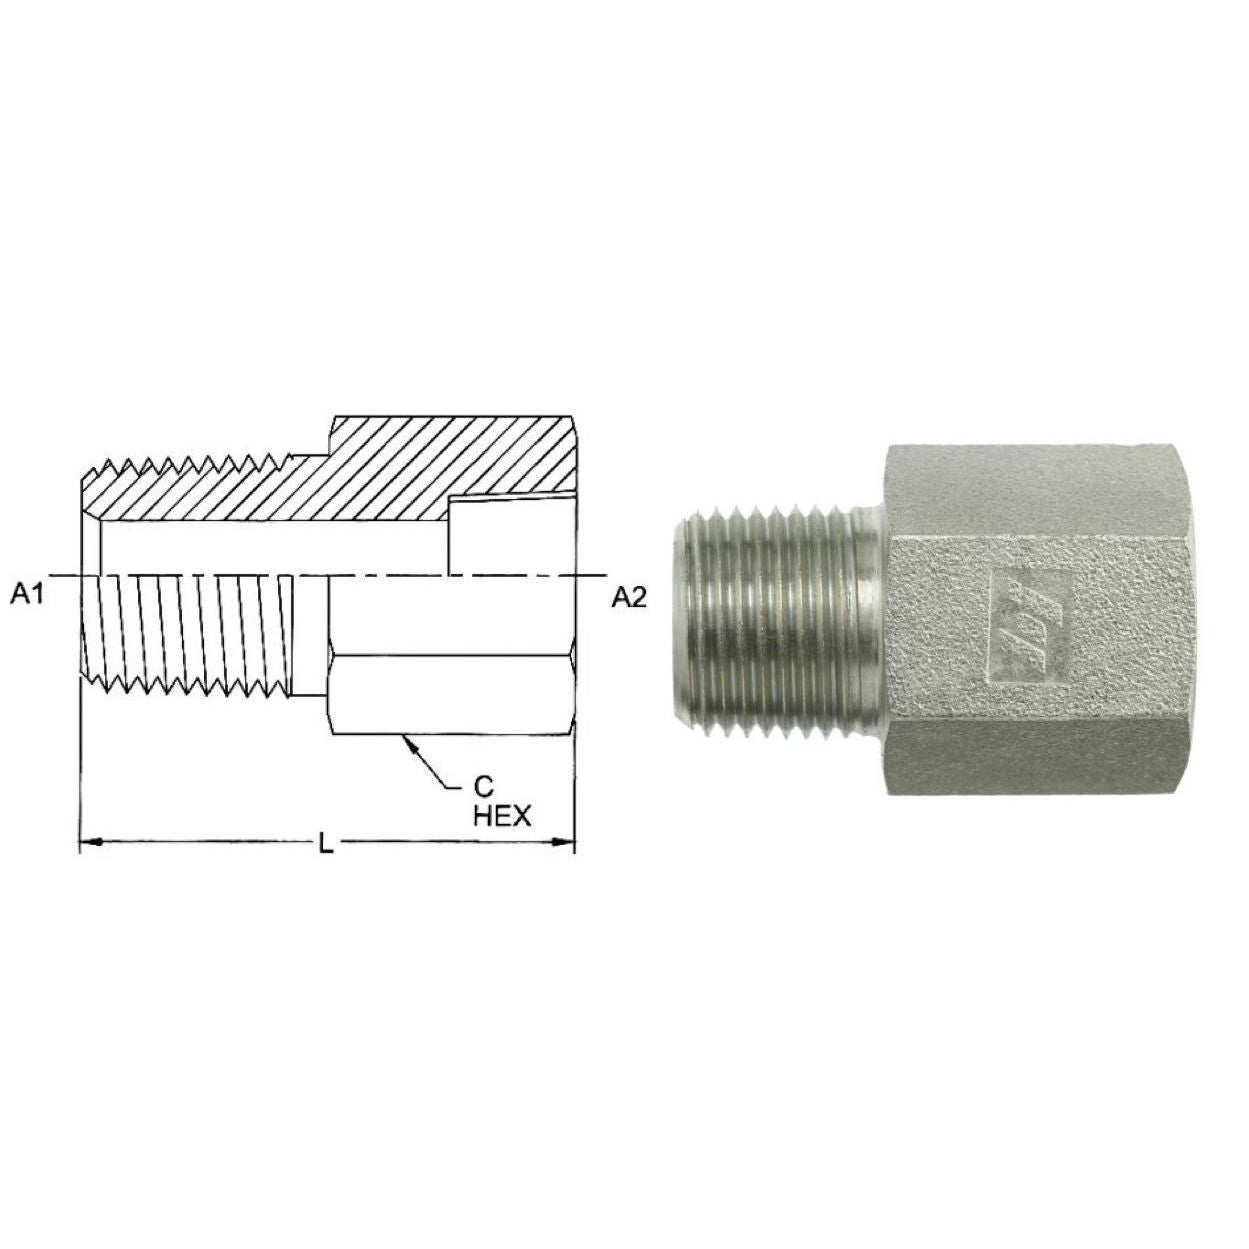 5405-32-32 : OneHydraulics Adapter, Straight Expander, 2" Male NPT x 2" Female, Steel, 1150psi